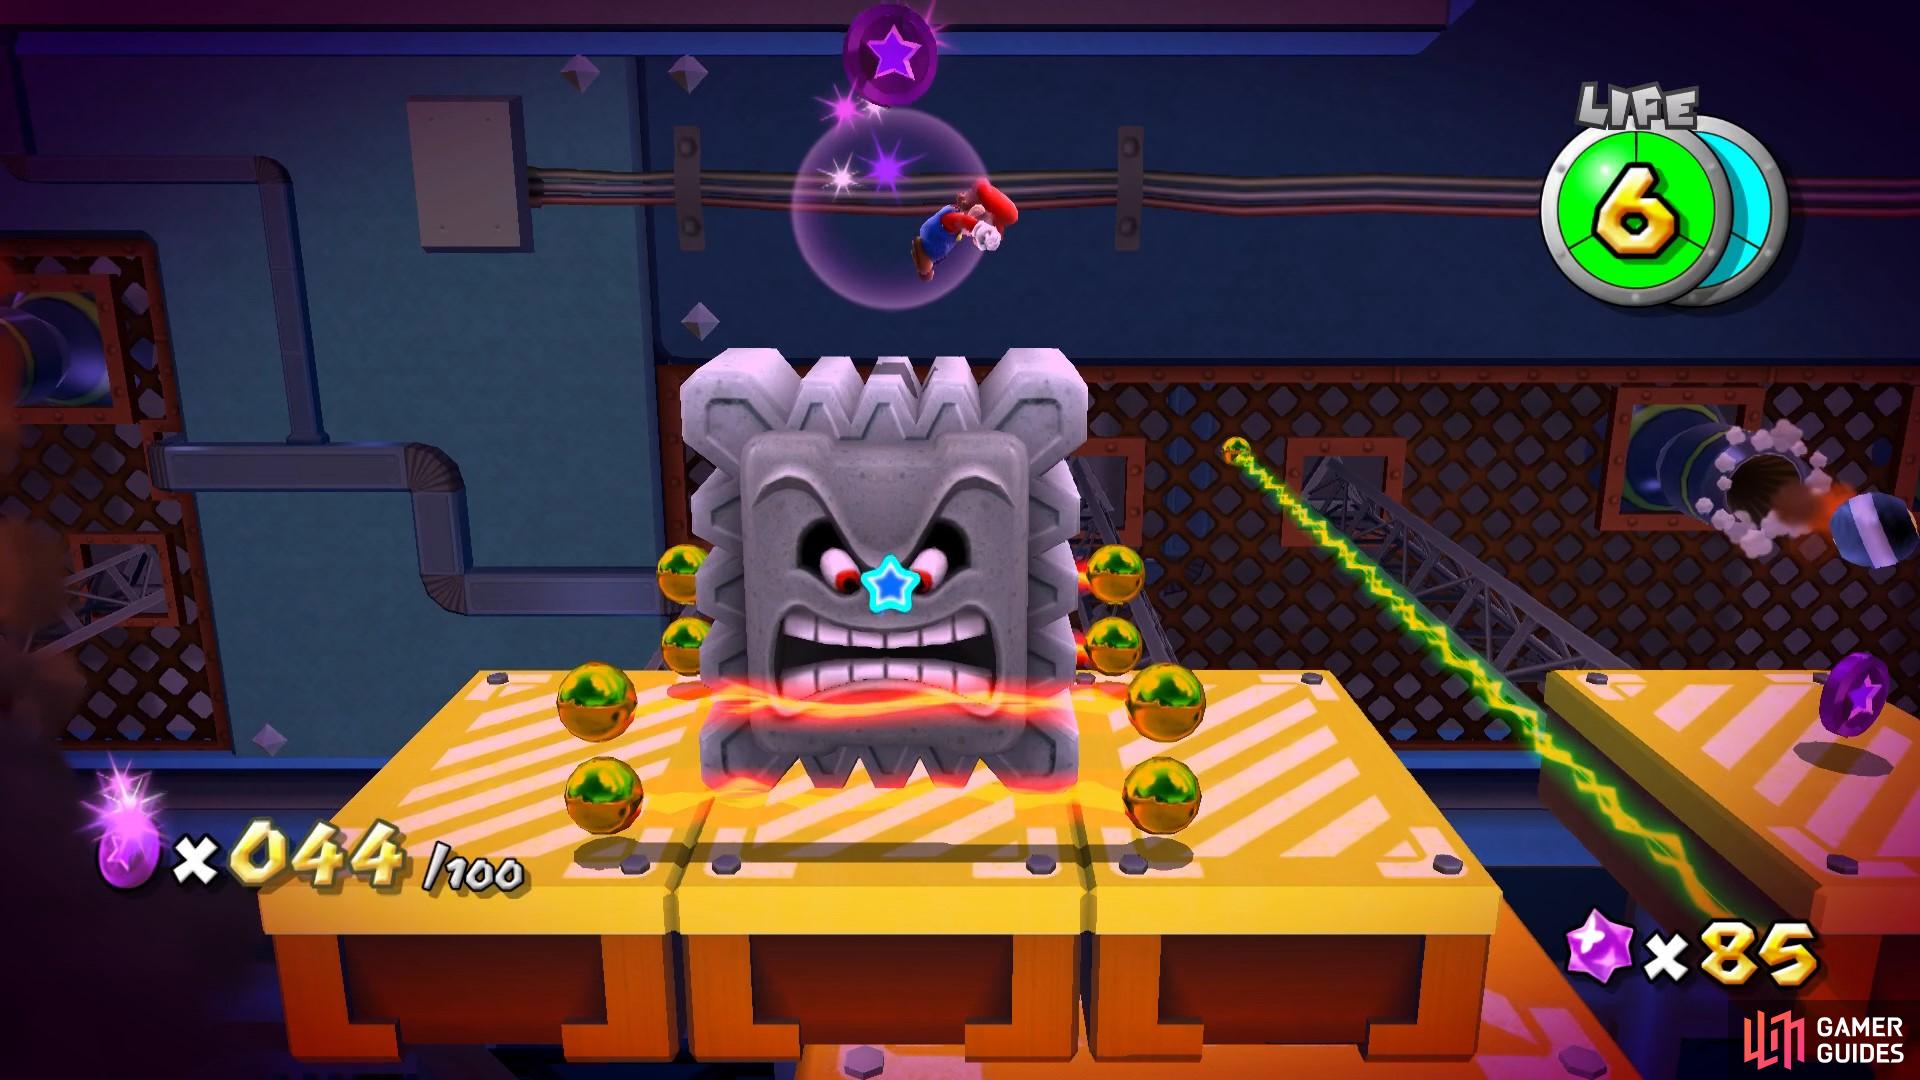 The coins above the Thwomp are definitely easily missed.